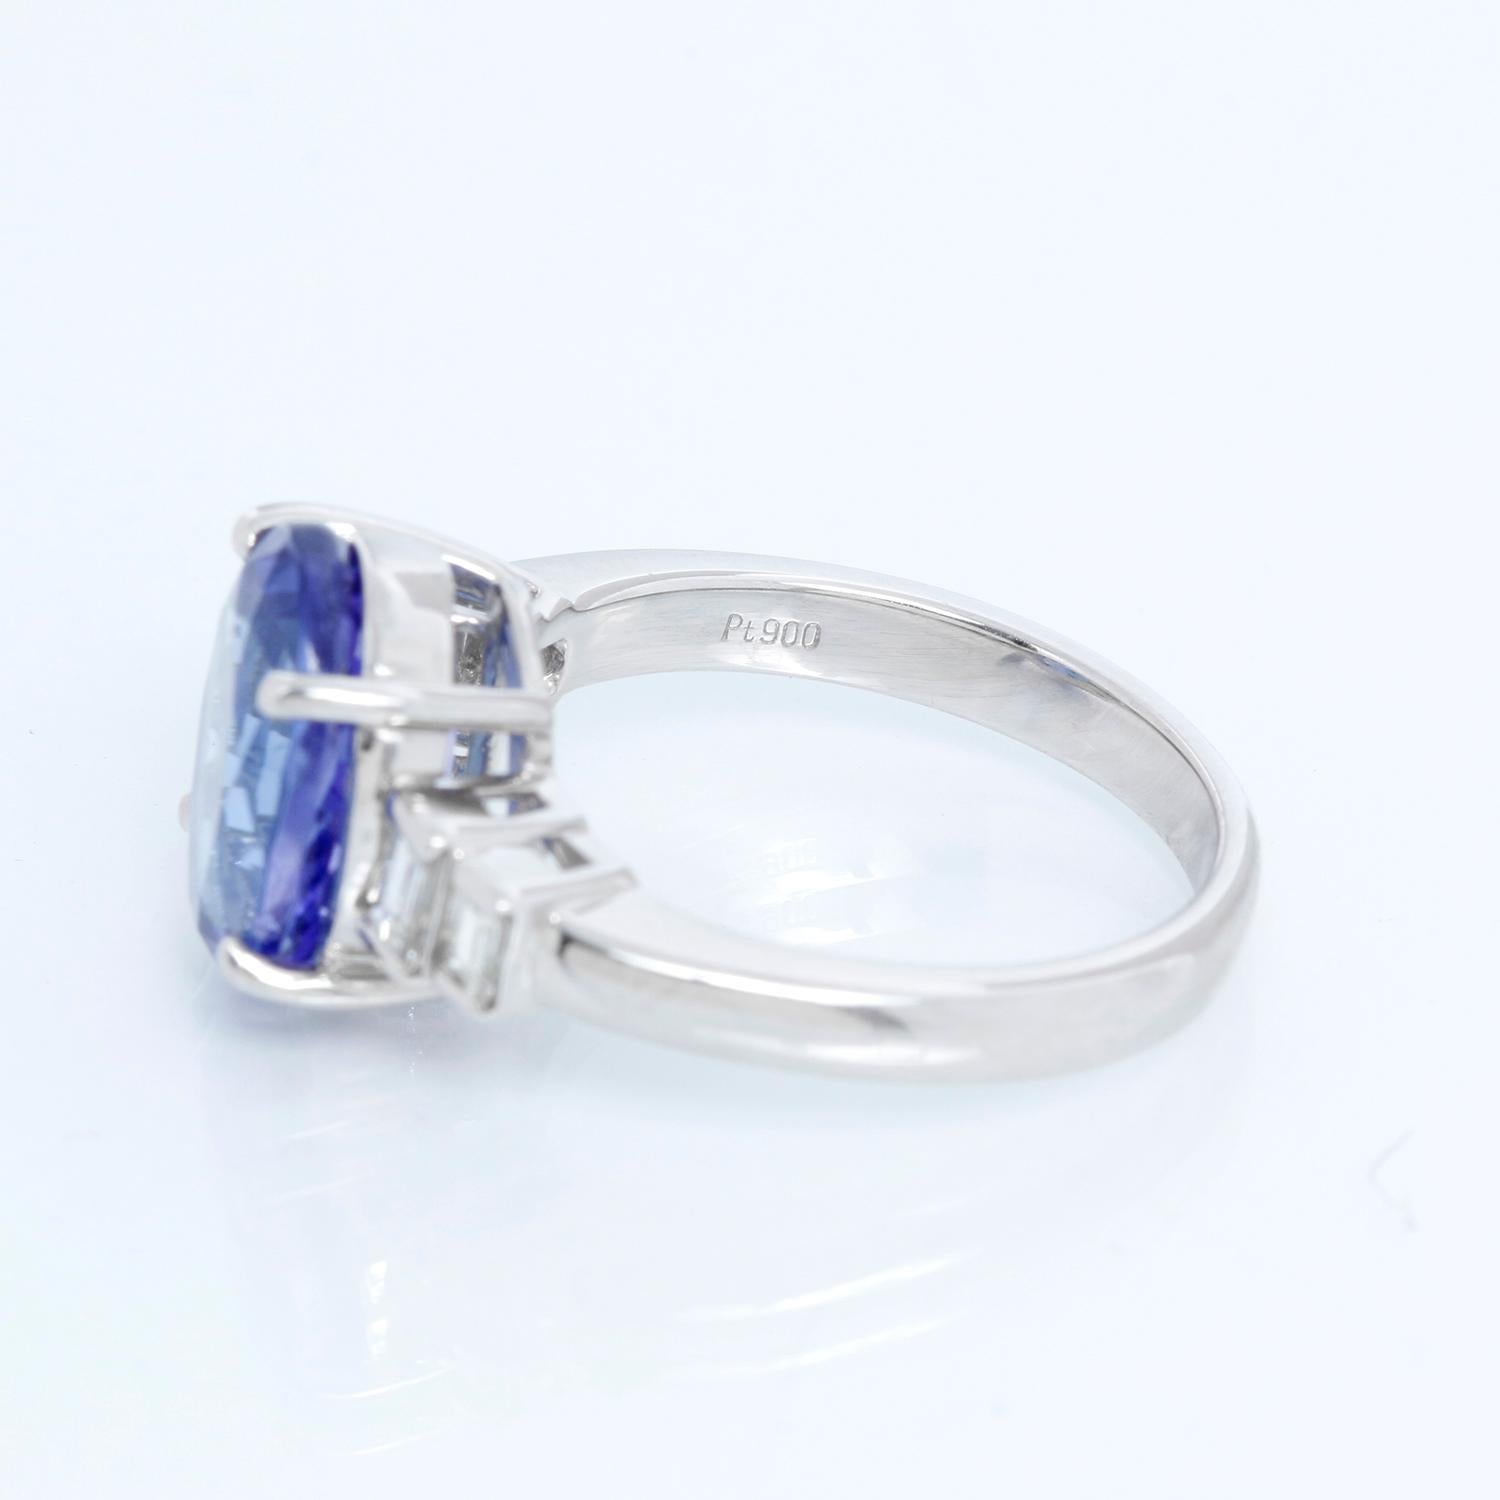 Oval Shaped Tanzanite with Diamonds Platinum Ring Size 7 In Excellent Condition For Sale In Dallas, TX